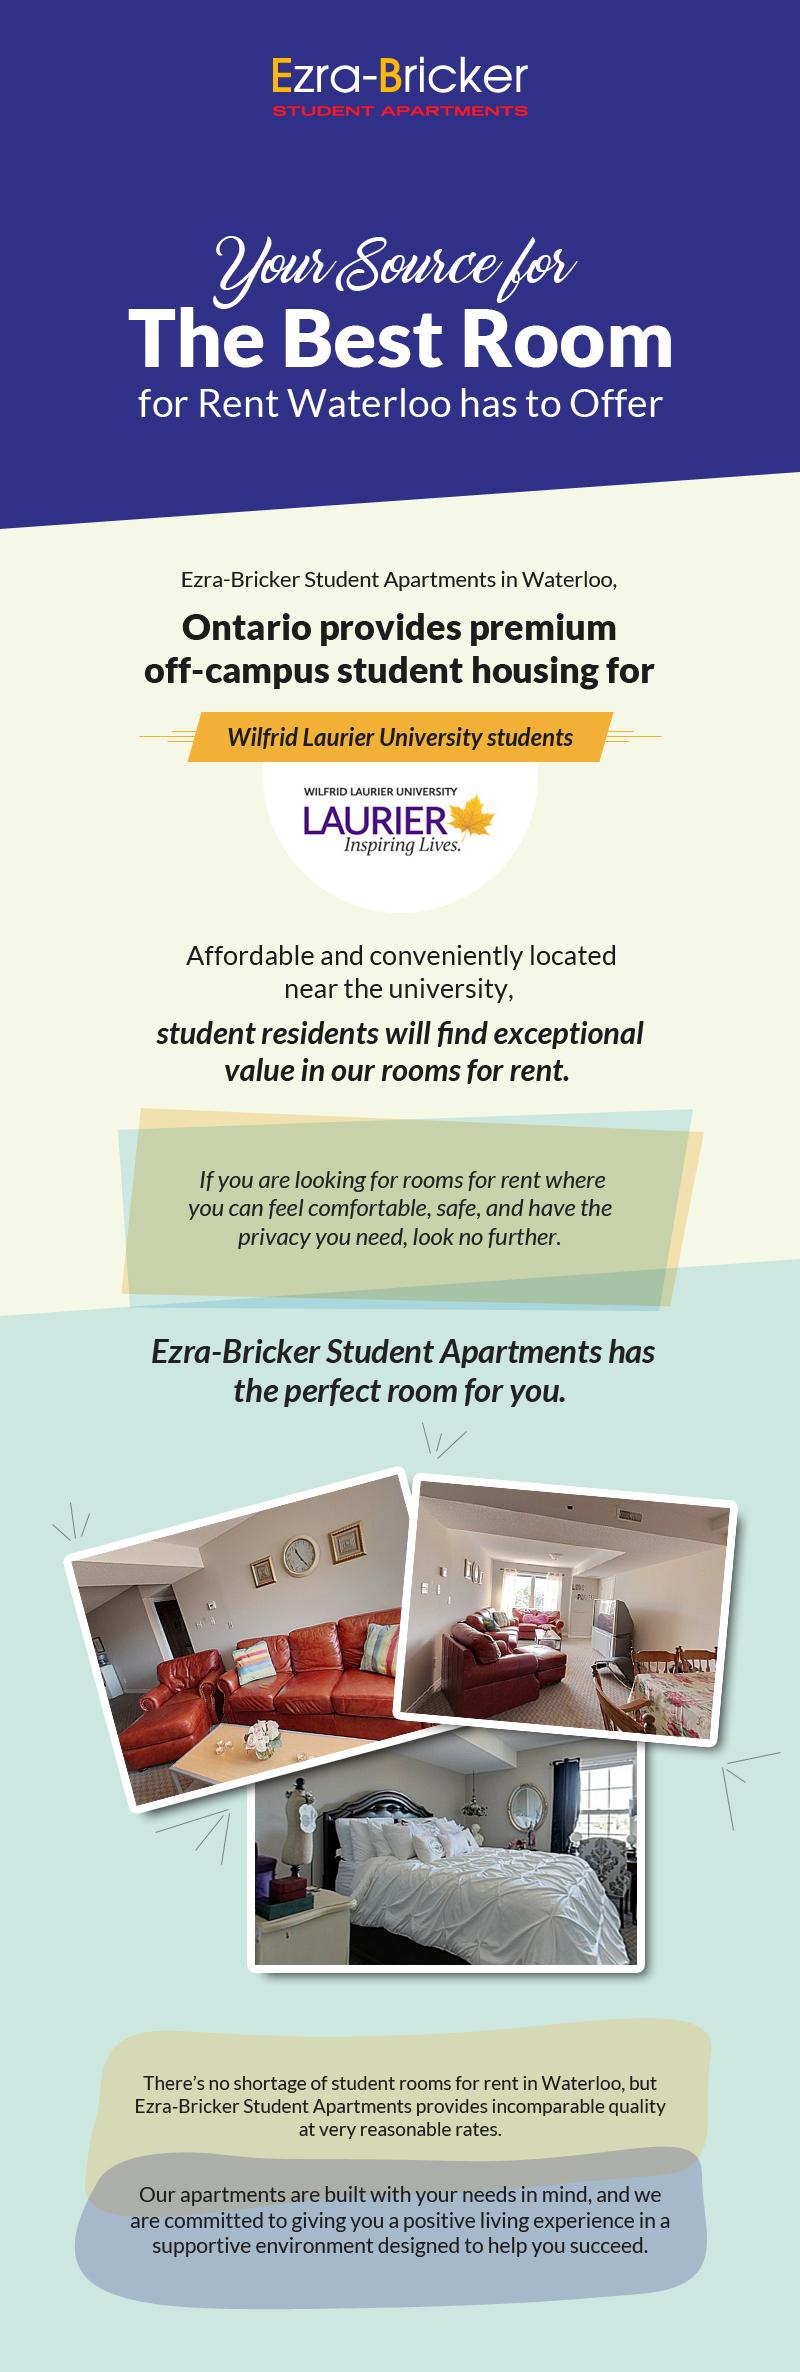 Ezra-Bricker Apartments - Your Source for Best Student Rooms for Rent